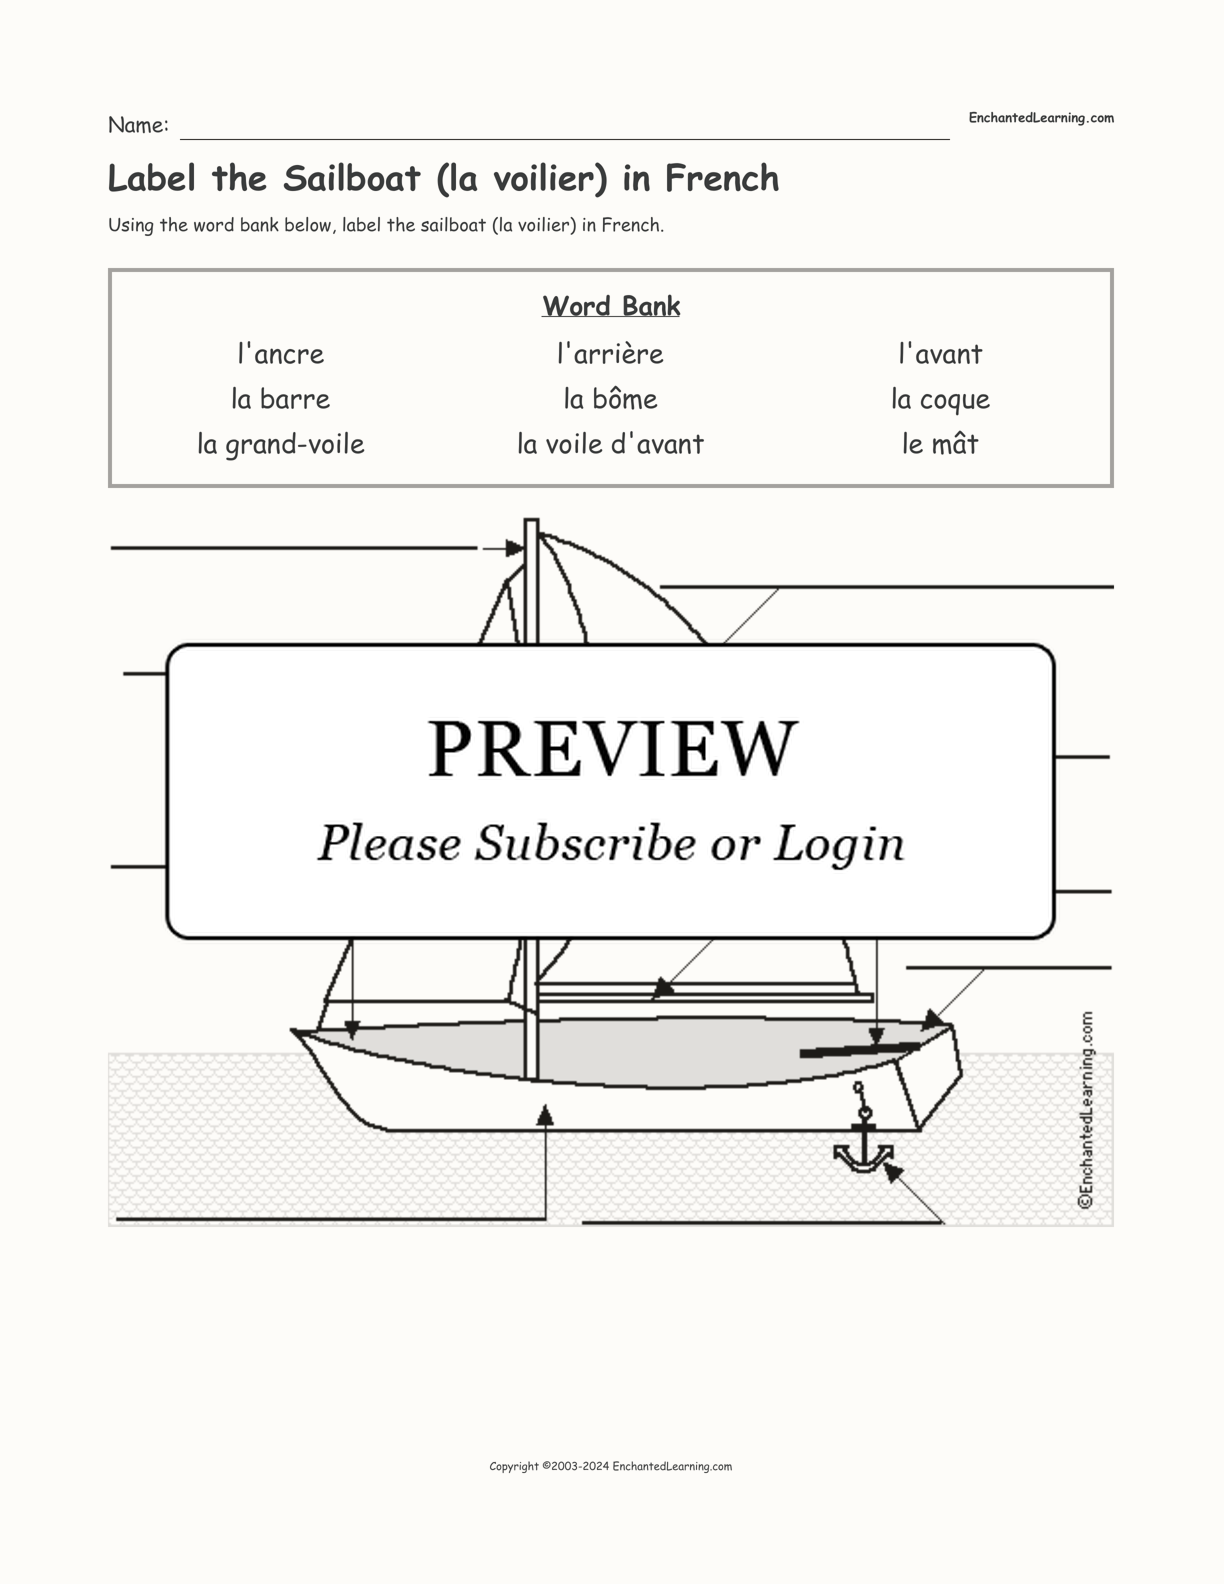 Label the Sailboat (la voilier) in French interactive worksheet page 1